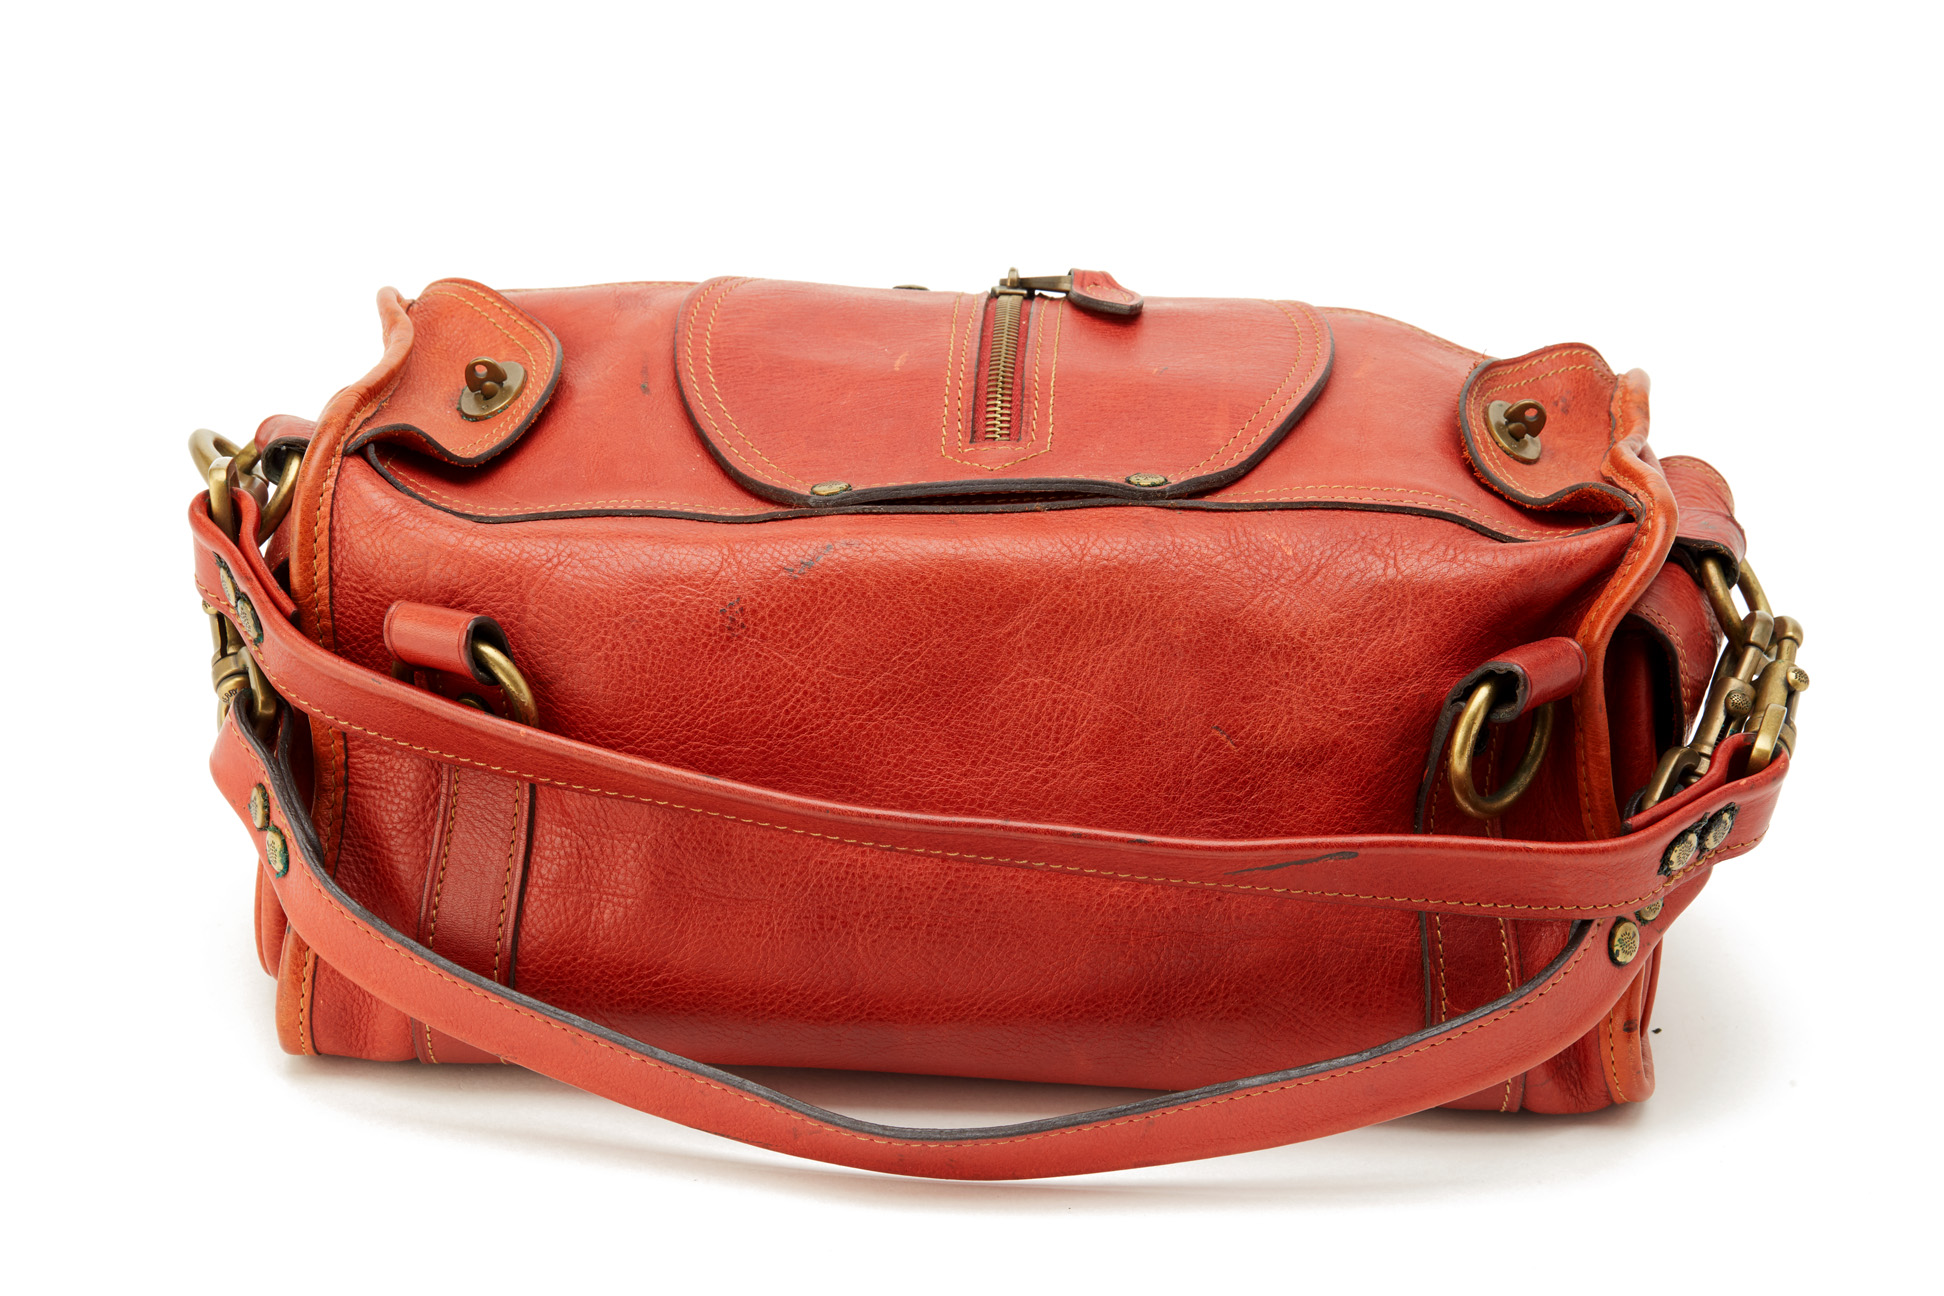 A MULBERRY OX BLOOD RED HANDBAG - Image 4 of 5